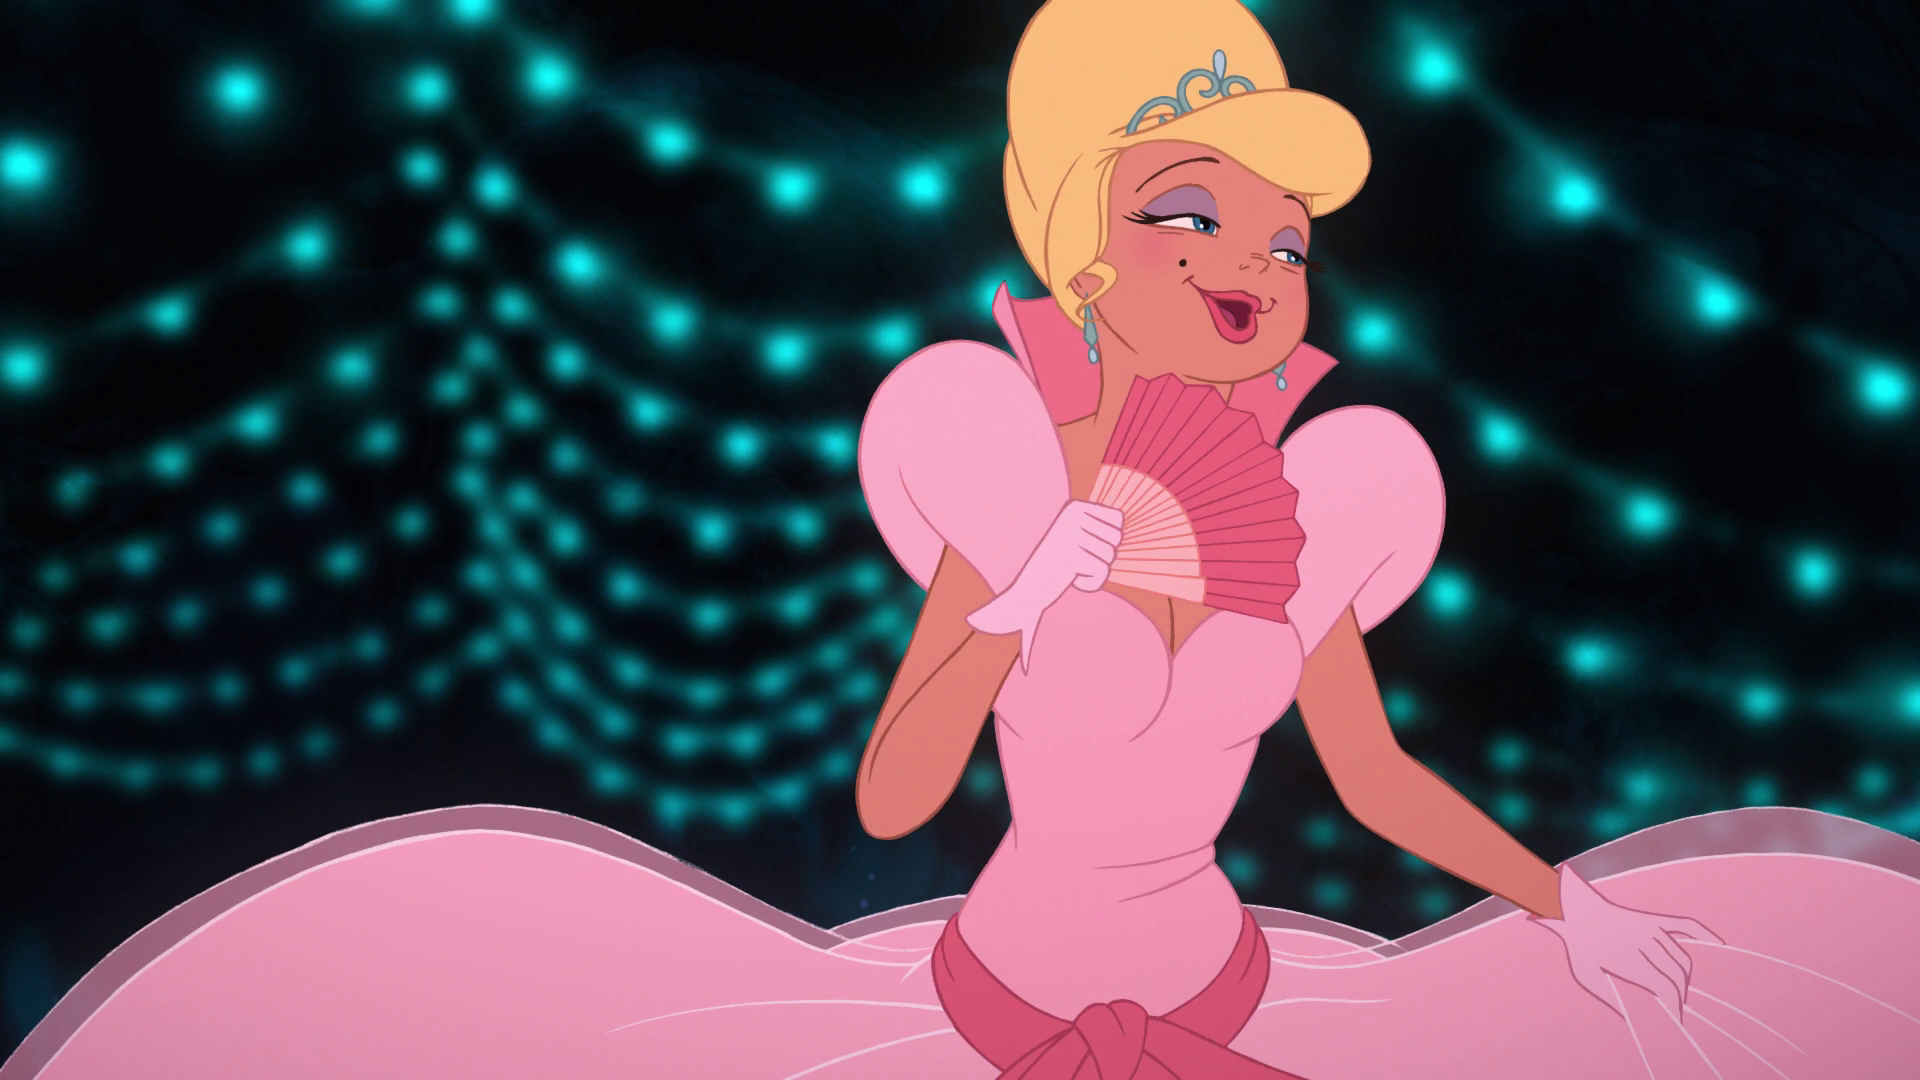  The.Princess.And.The.Frog.2009.1080p.Bluray.x264-LCHD 6.56GB-4.png